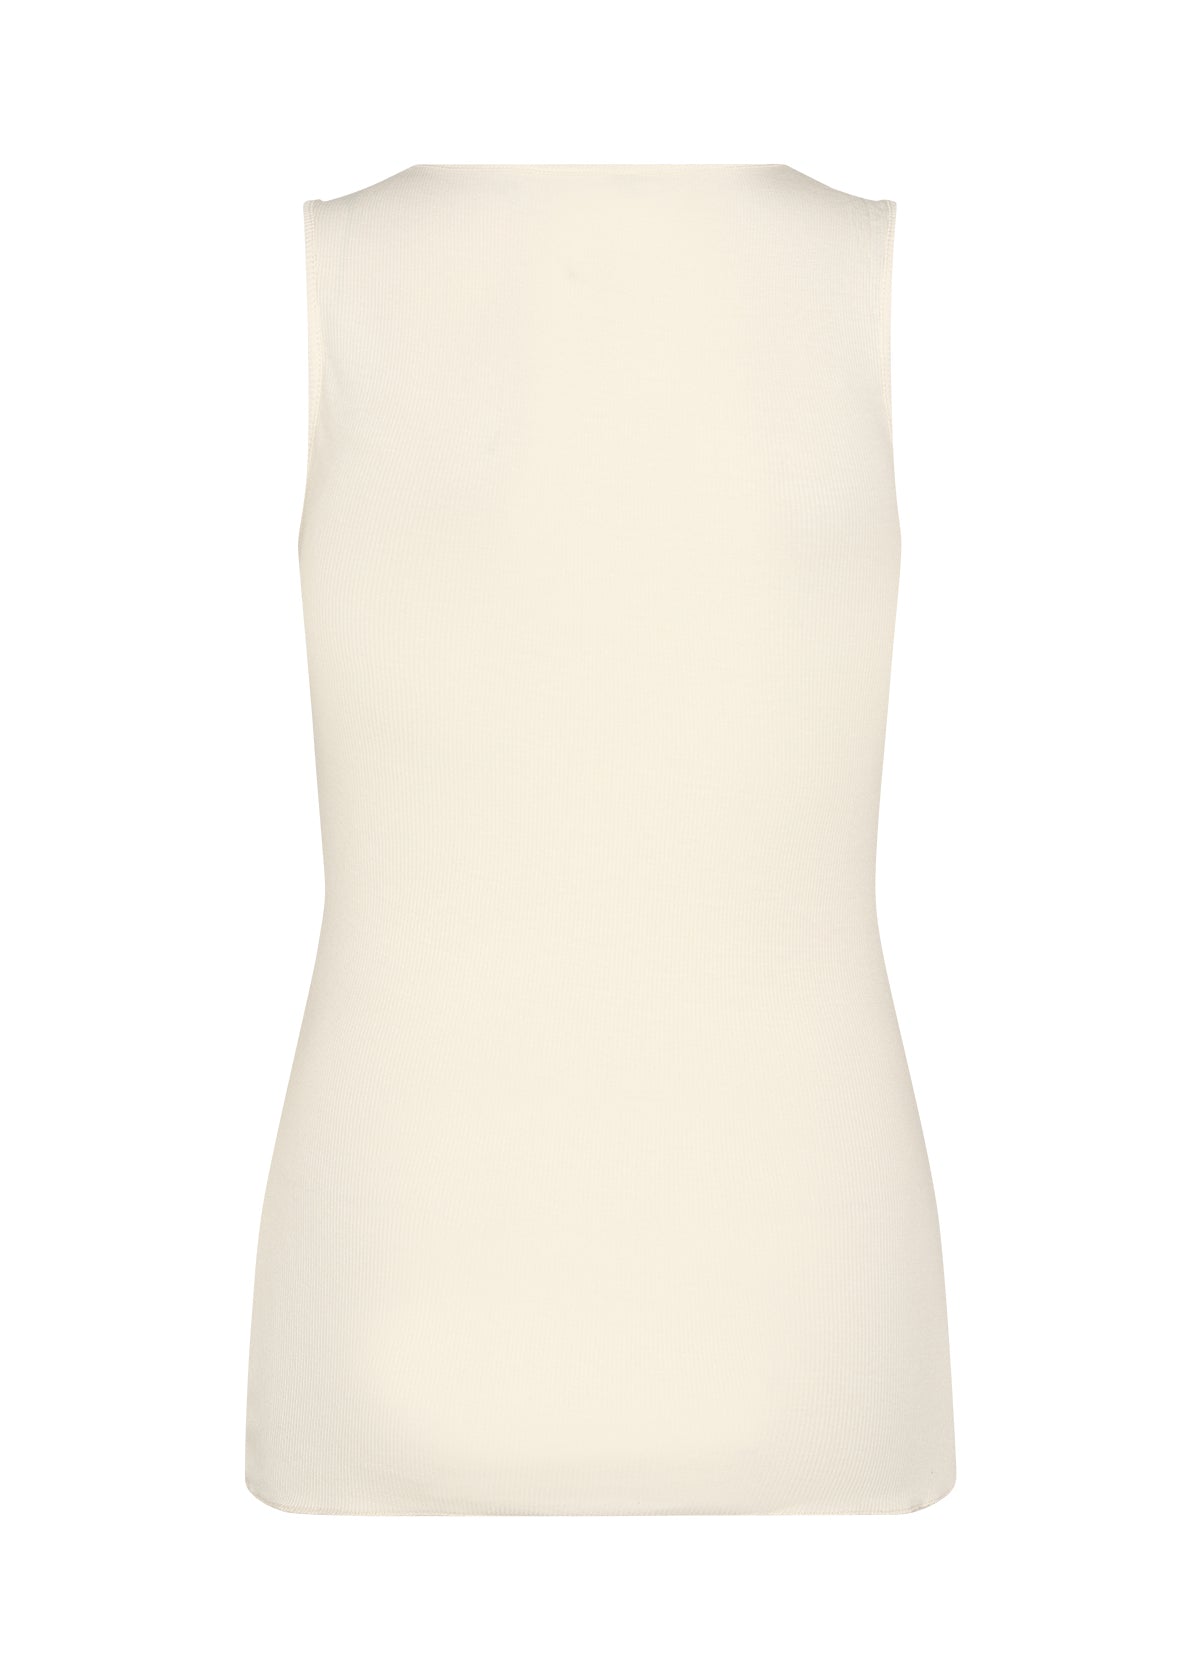 SOYA CONCEPT Ryan 31 Ribbed Lace Collared Camisole